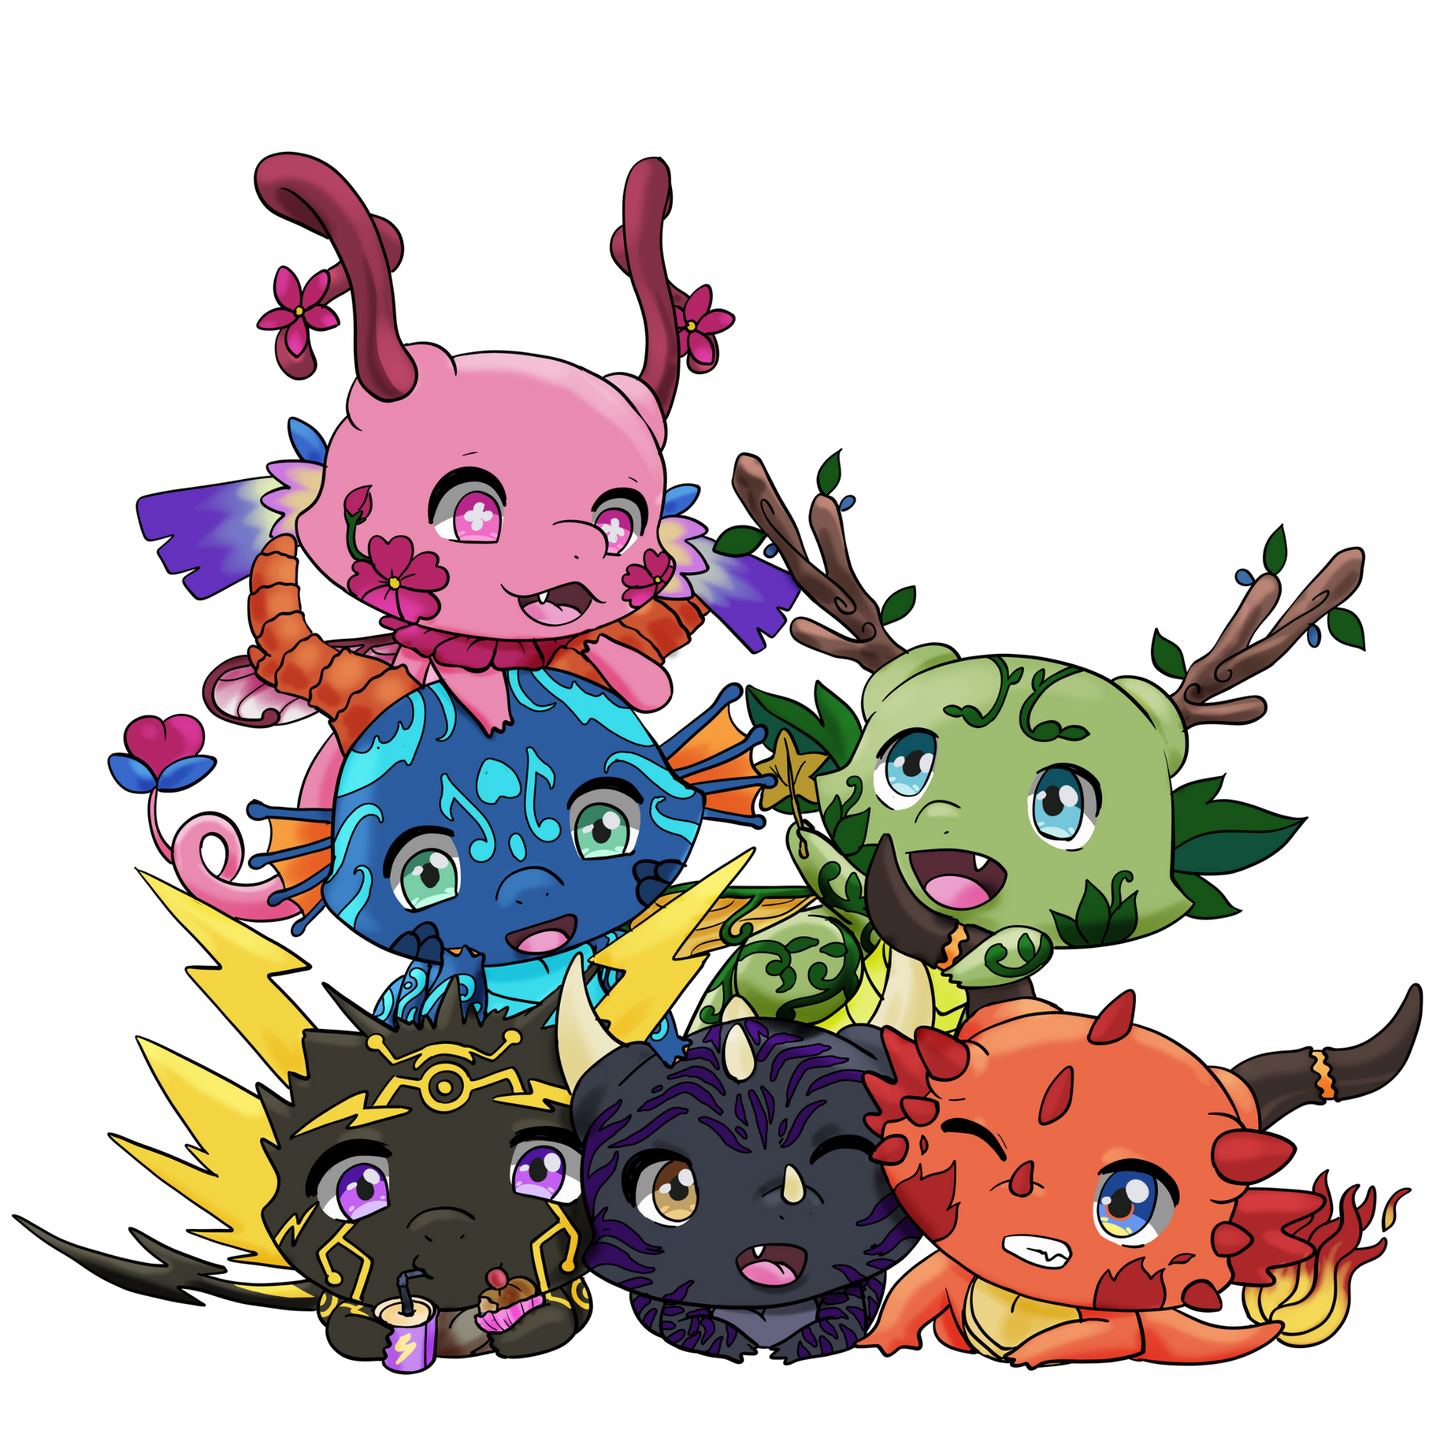 OUR LATEST UPCOMING TINY DRAGONS